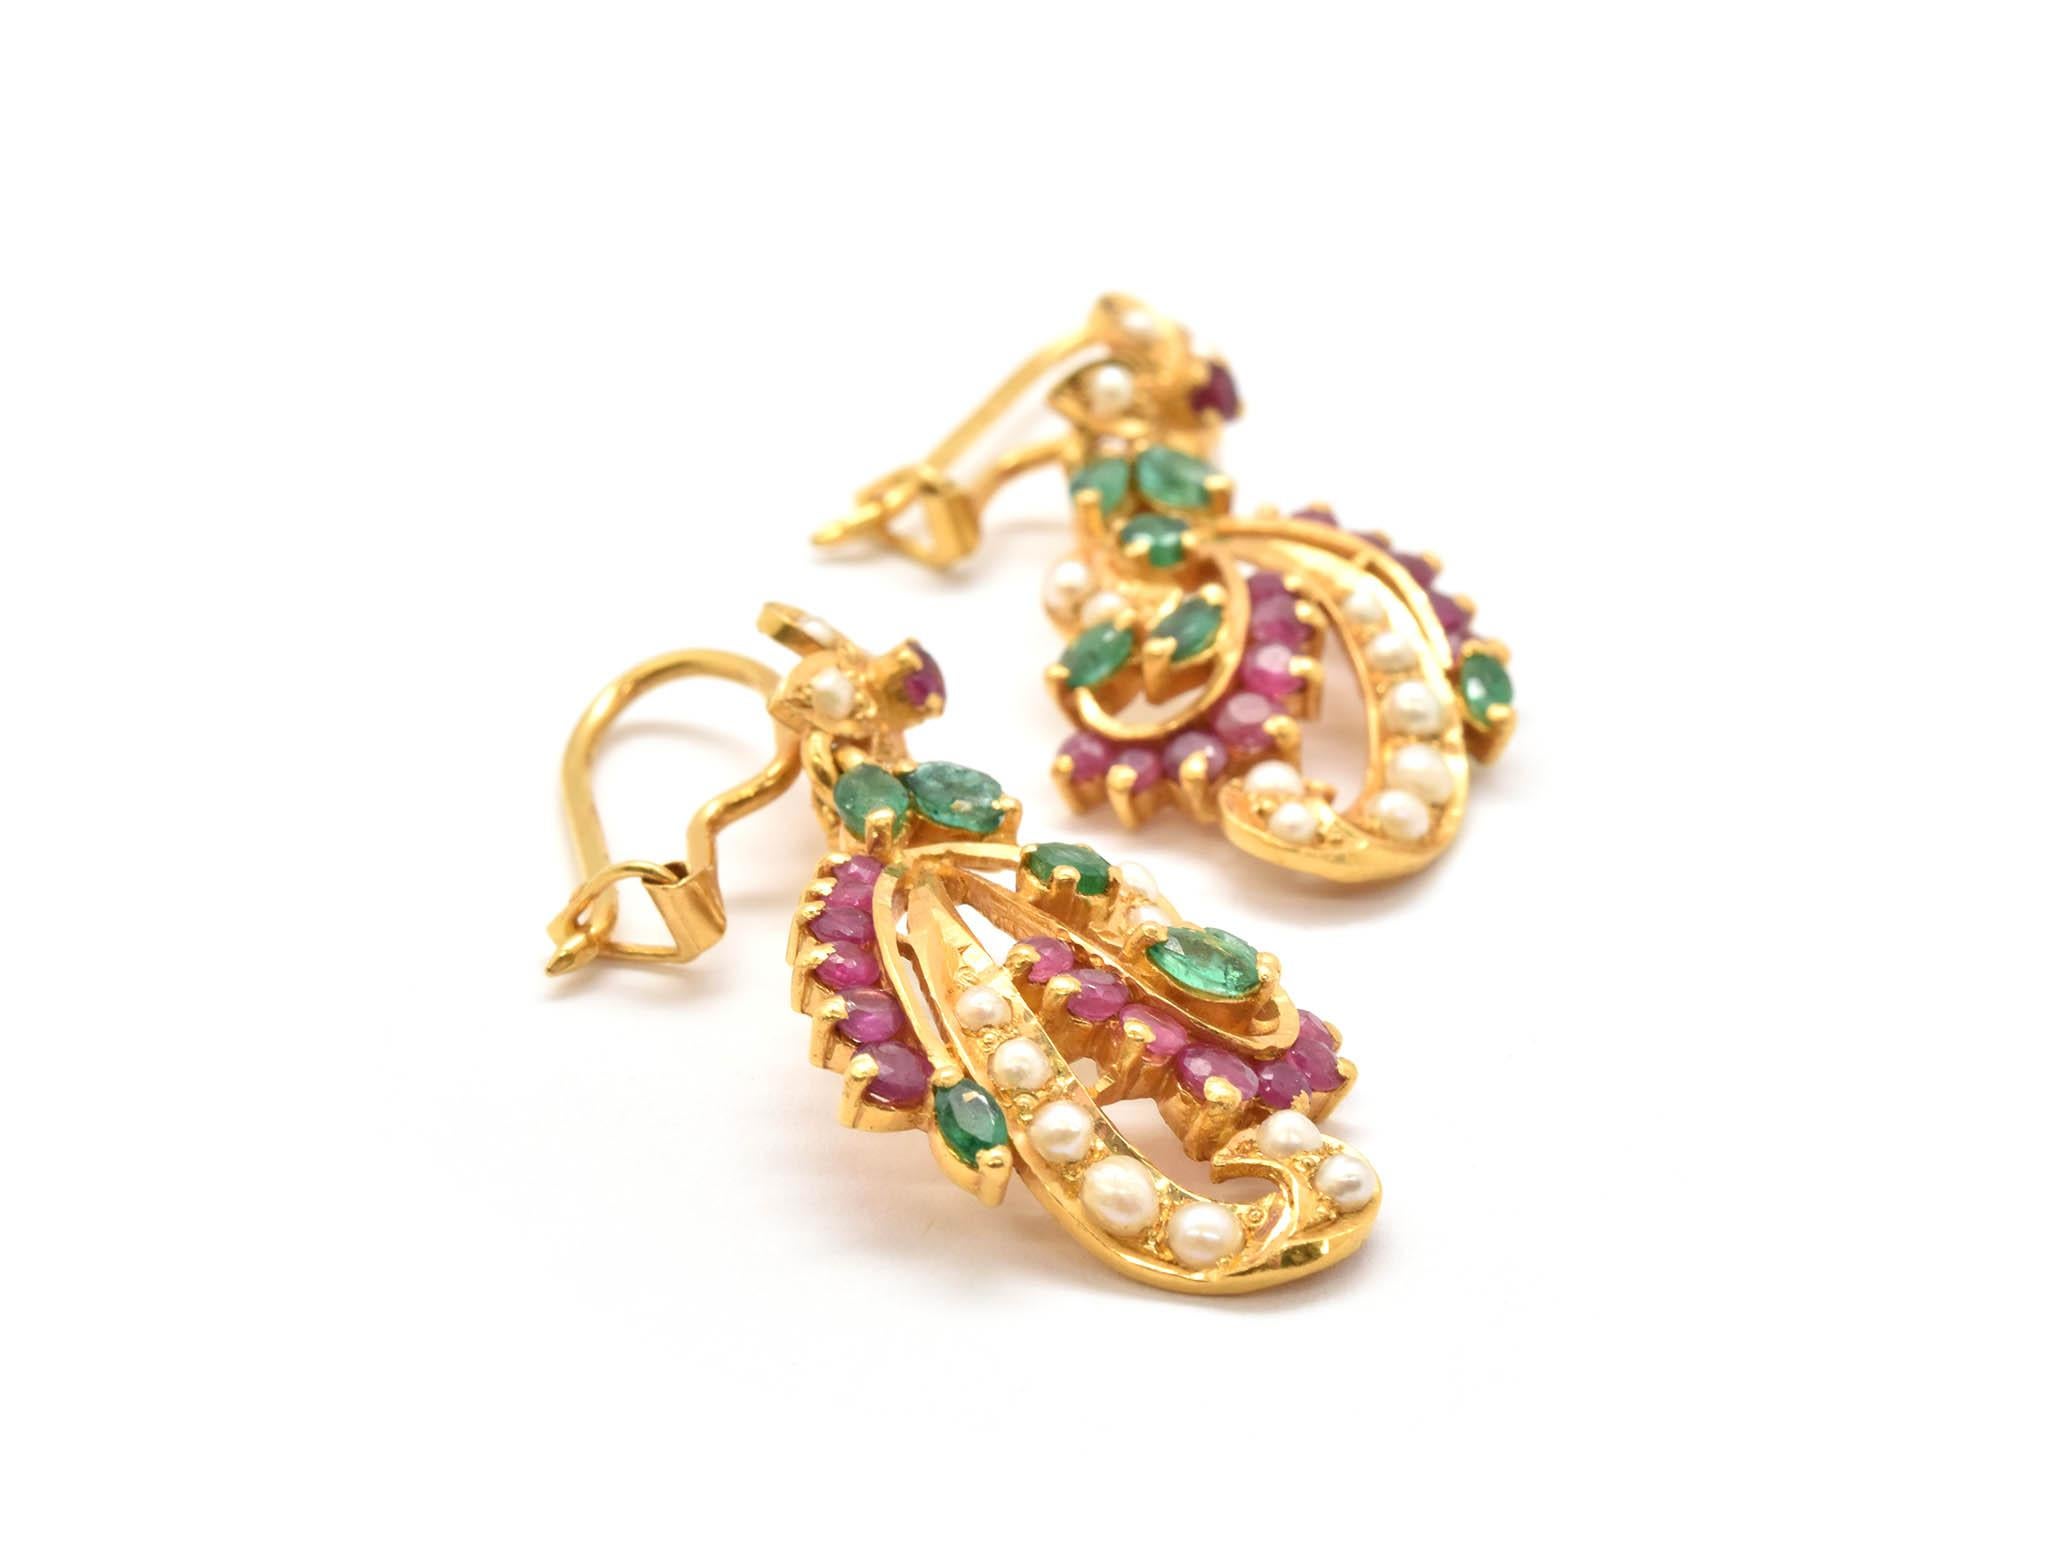 This vintage pair of earrings are fashioned from 22k yellow gold, with emeralds, rubies and pearls artistically mounted in the 22k yellow gold prong settings! Rubies and emeralds are cut in round, oval and marquise shapes. Each earring has 14 seed